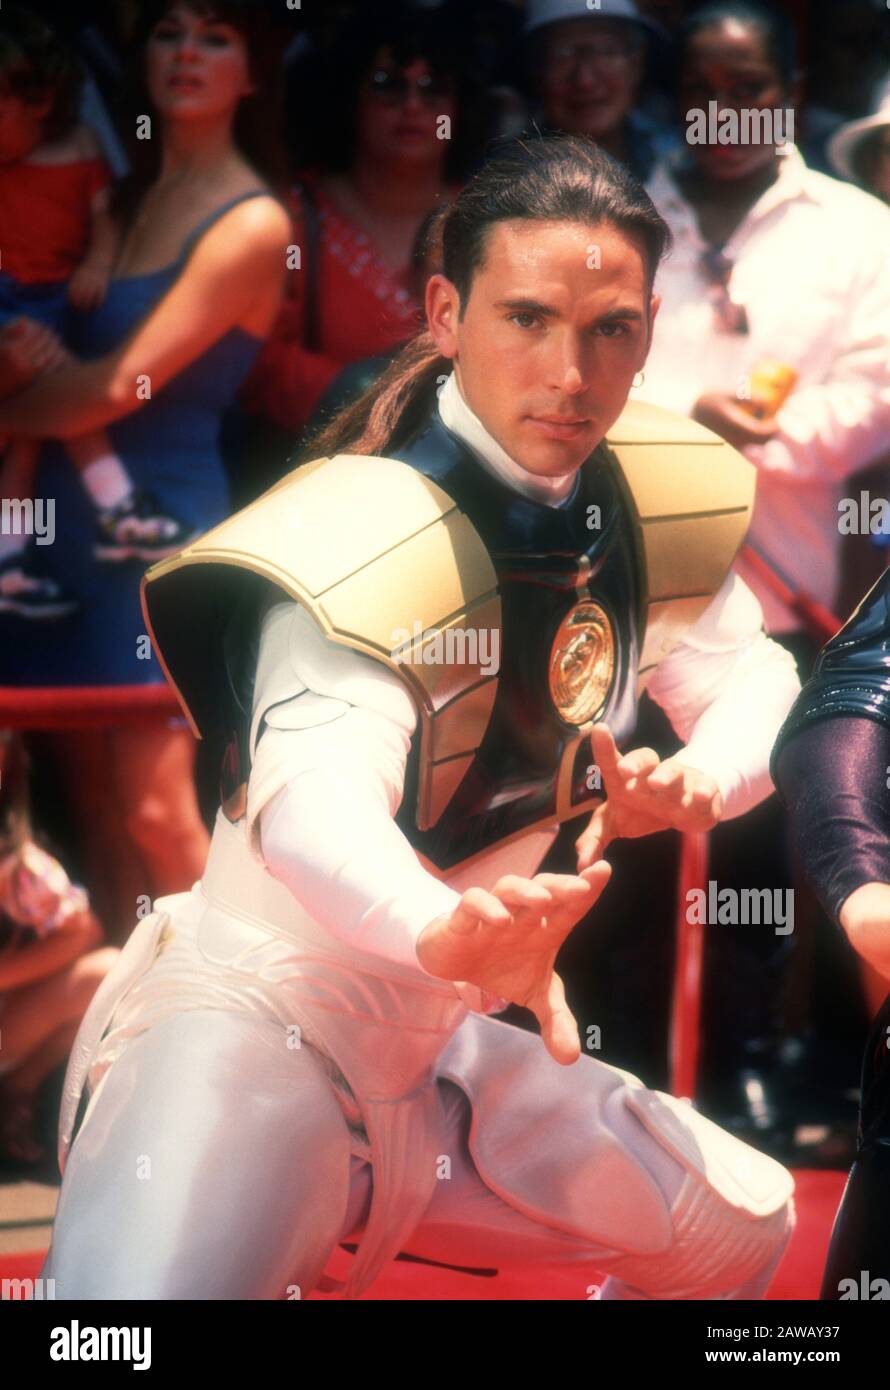 https://c8.alamy.com/comp/2AWAY37/hollywood-california-usa-22nd-june-1995-actor-jason-david-frank-attends-the-mighty-morphin-power-rangers-hand-and-footprint-ceremony-on-june-22-1995-at-manns-chinese-theatre-in-hollywood-california-usa-photo-by-barry-kingalamy-stock-photo-2AWAY37.jpg